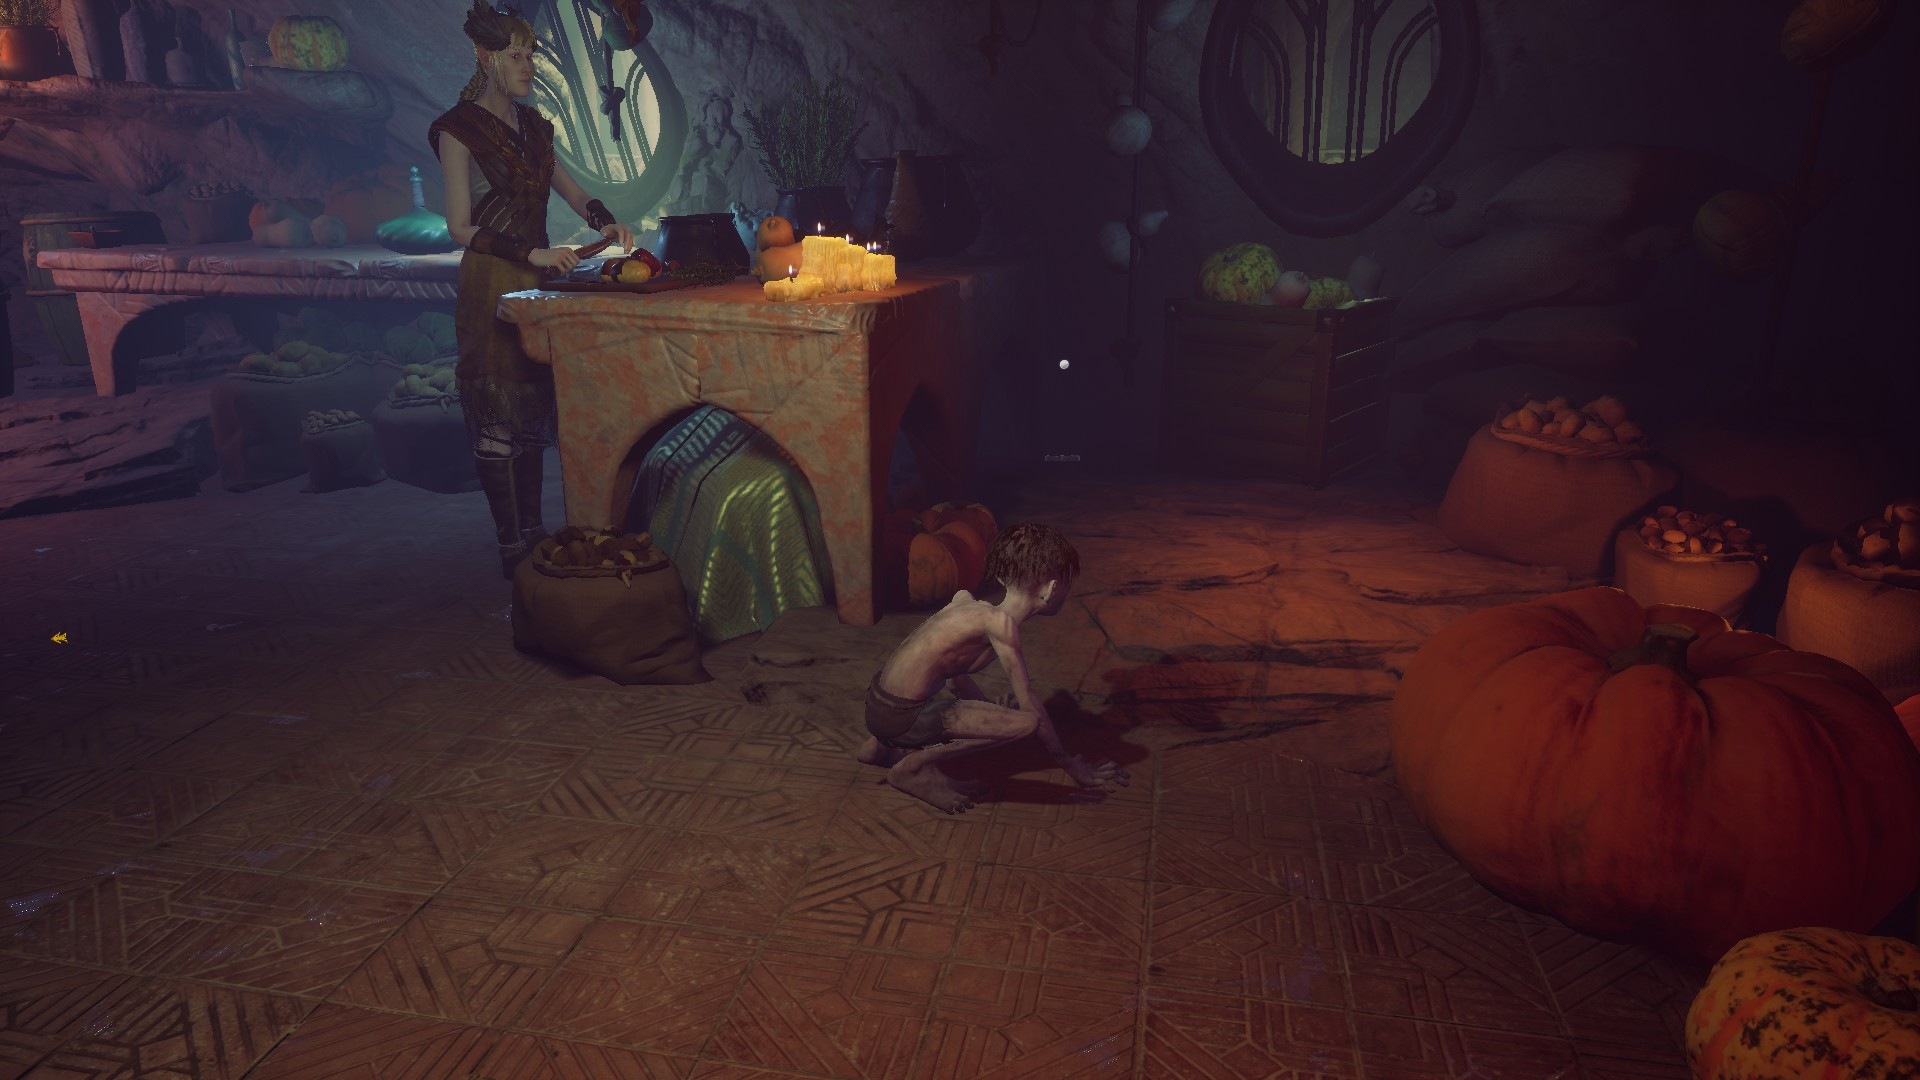 Gollum screenshot showing an elf cooking while Gollum crouches behind the counter. 